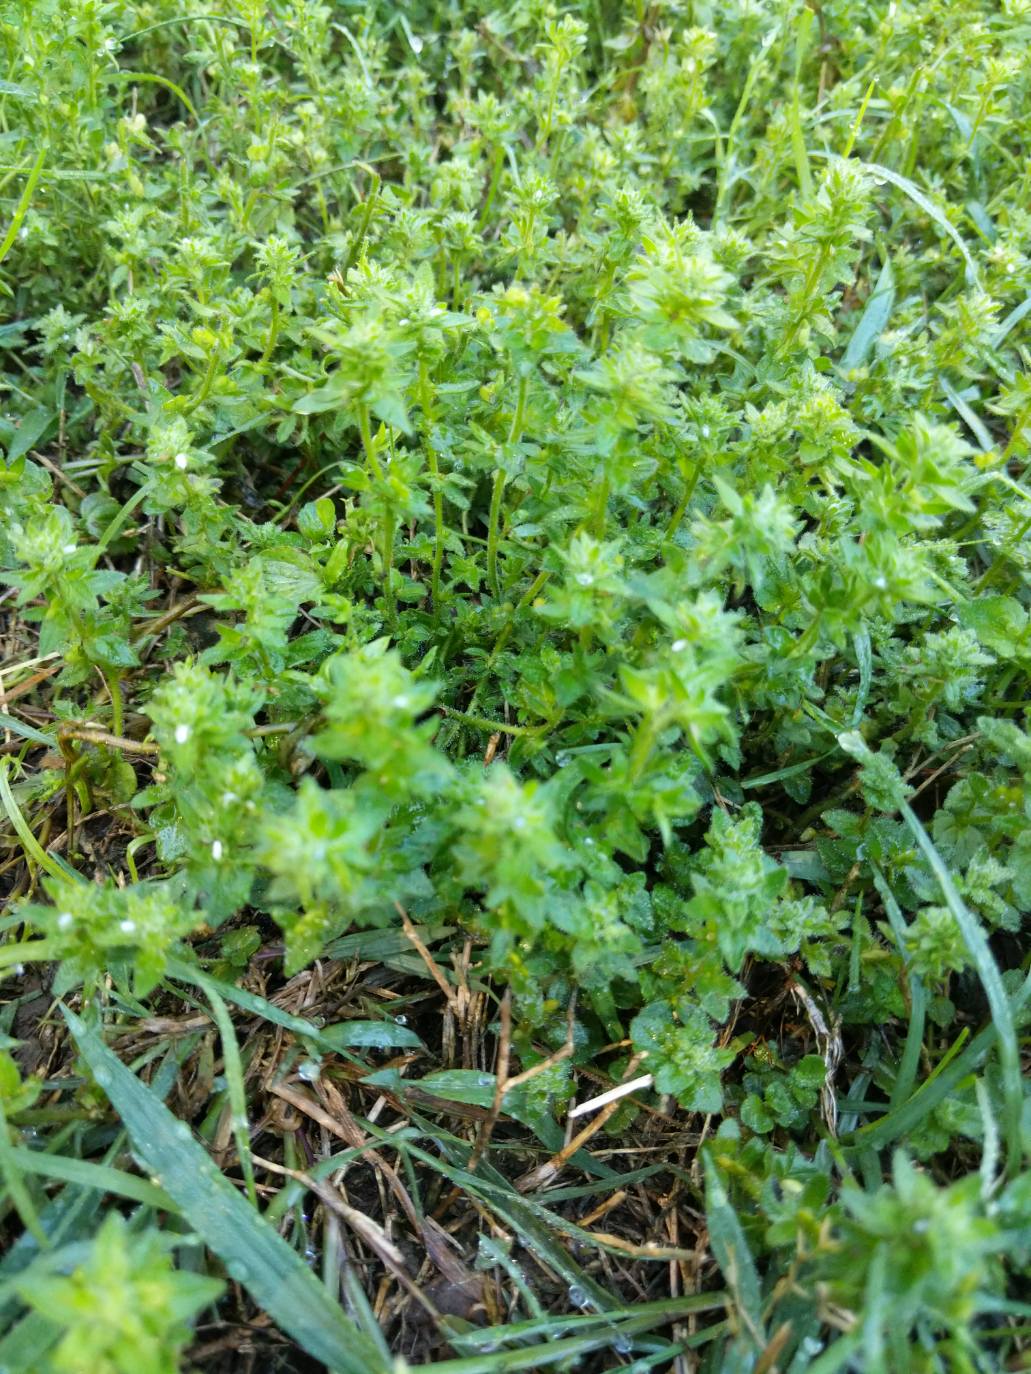 Identify this lawn weed please